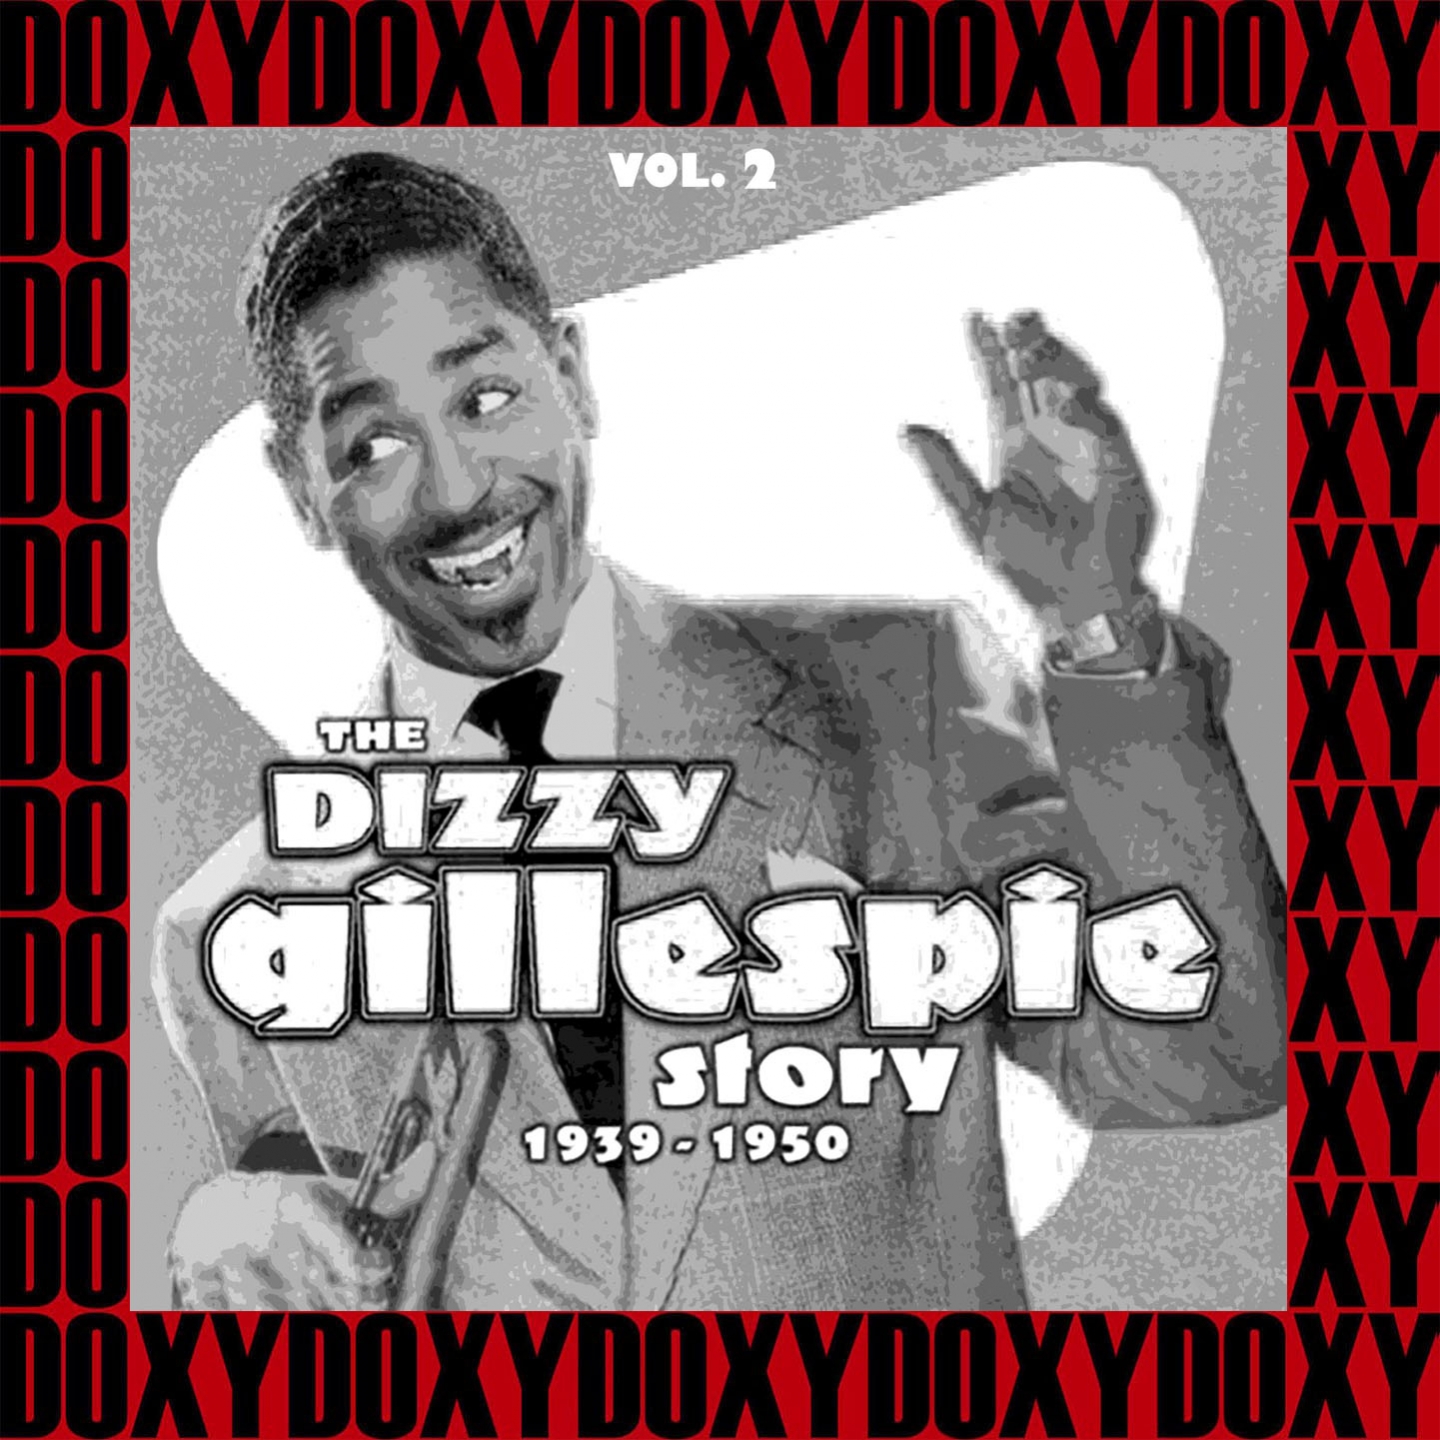 The Dizzy Gillespie Story 1939-1950, Vol. 2 (Hd Remastered Edition, Doxy Collection)